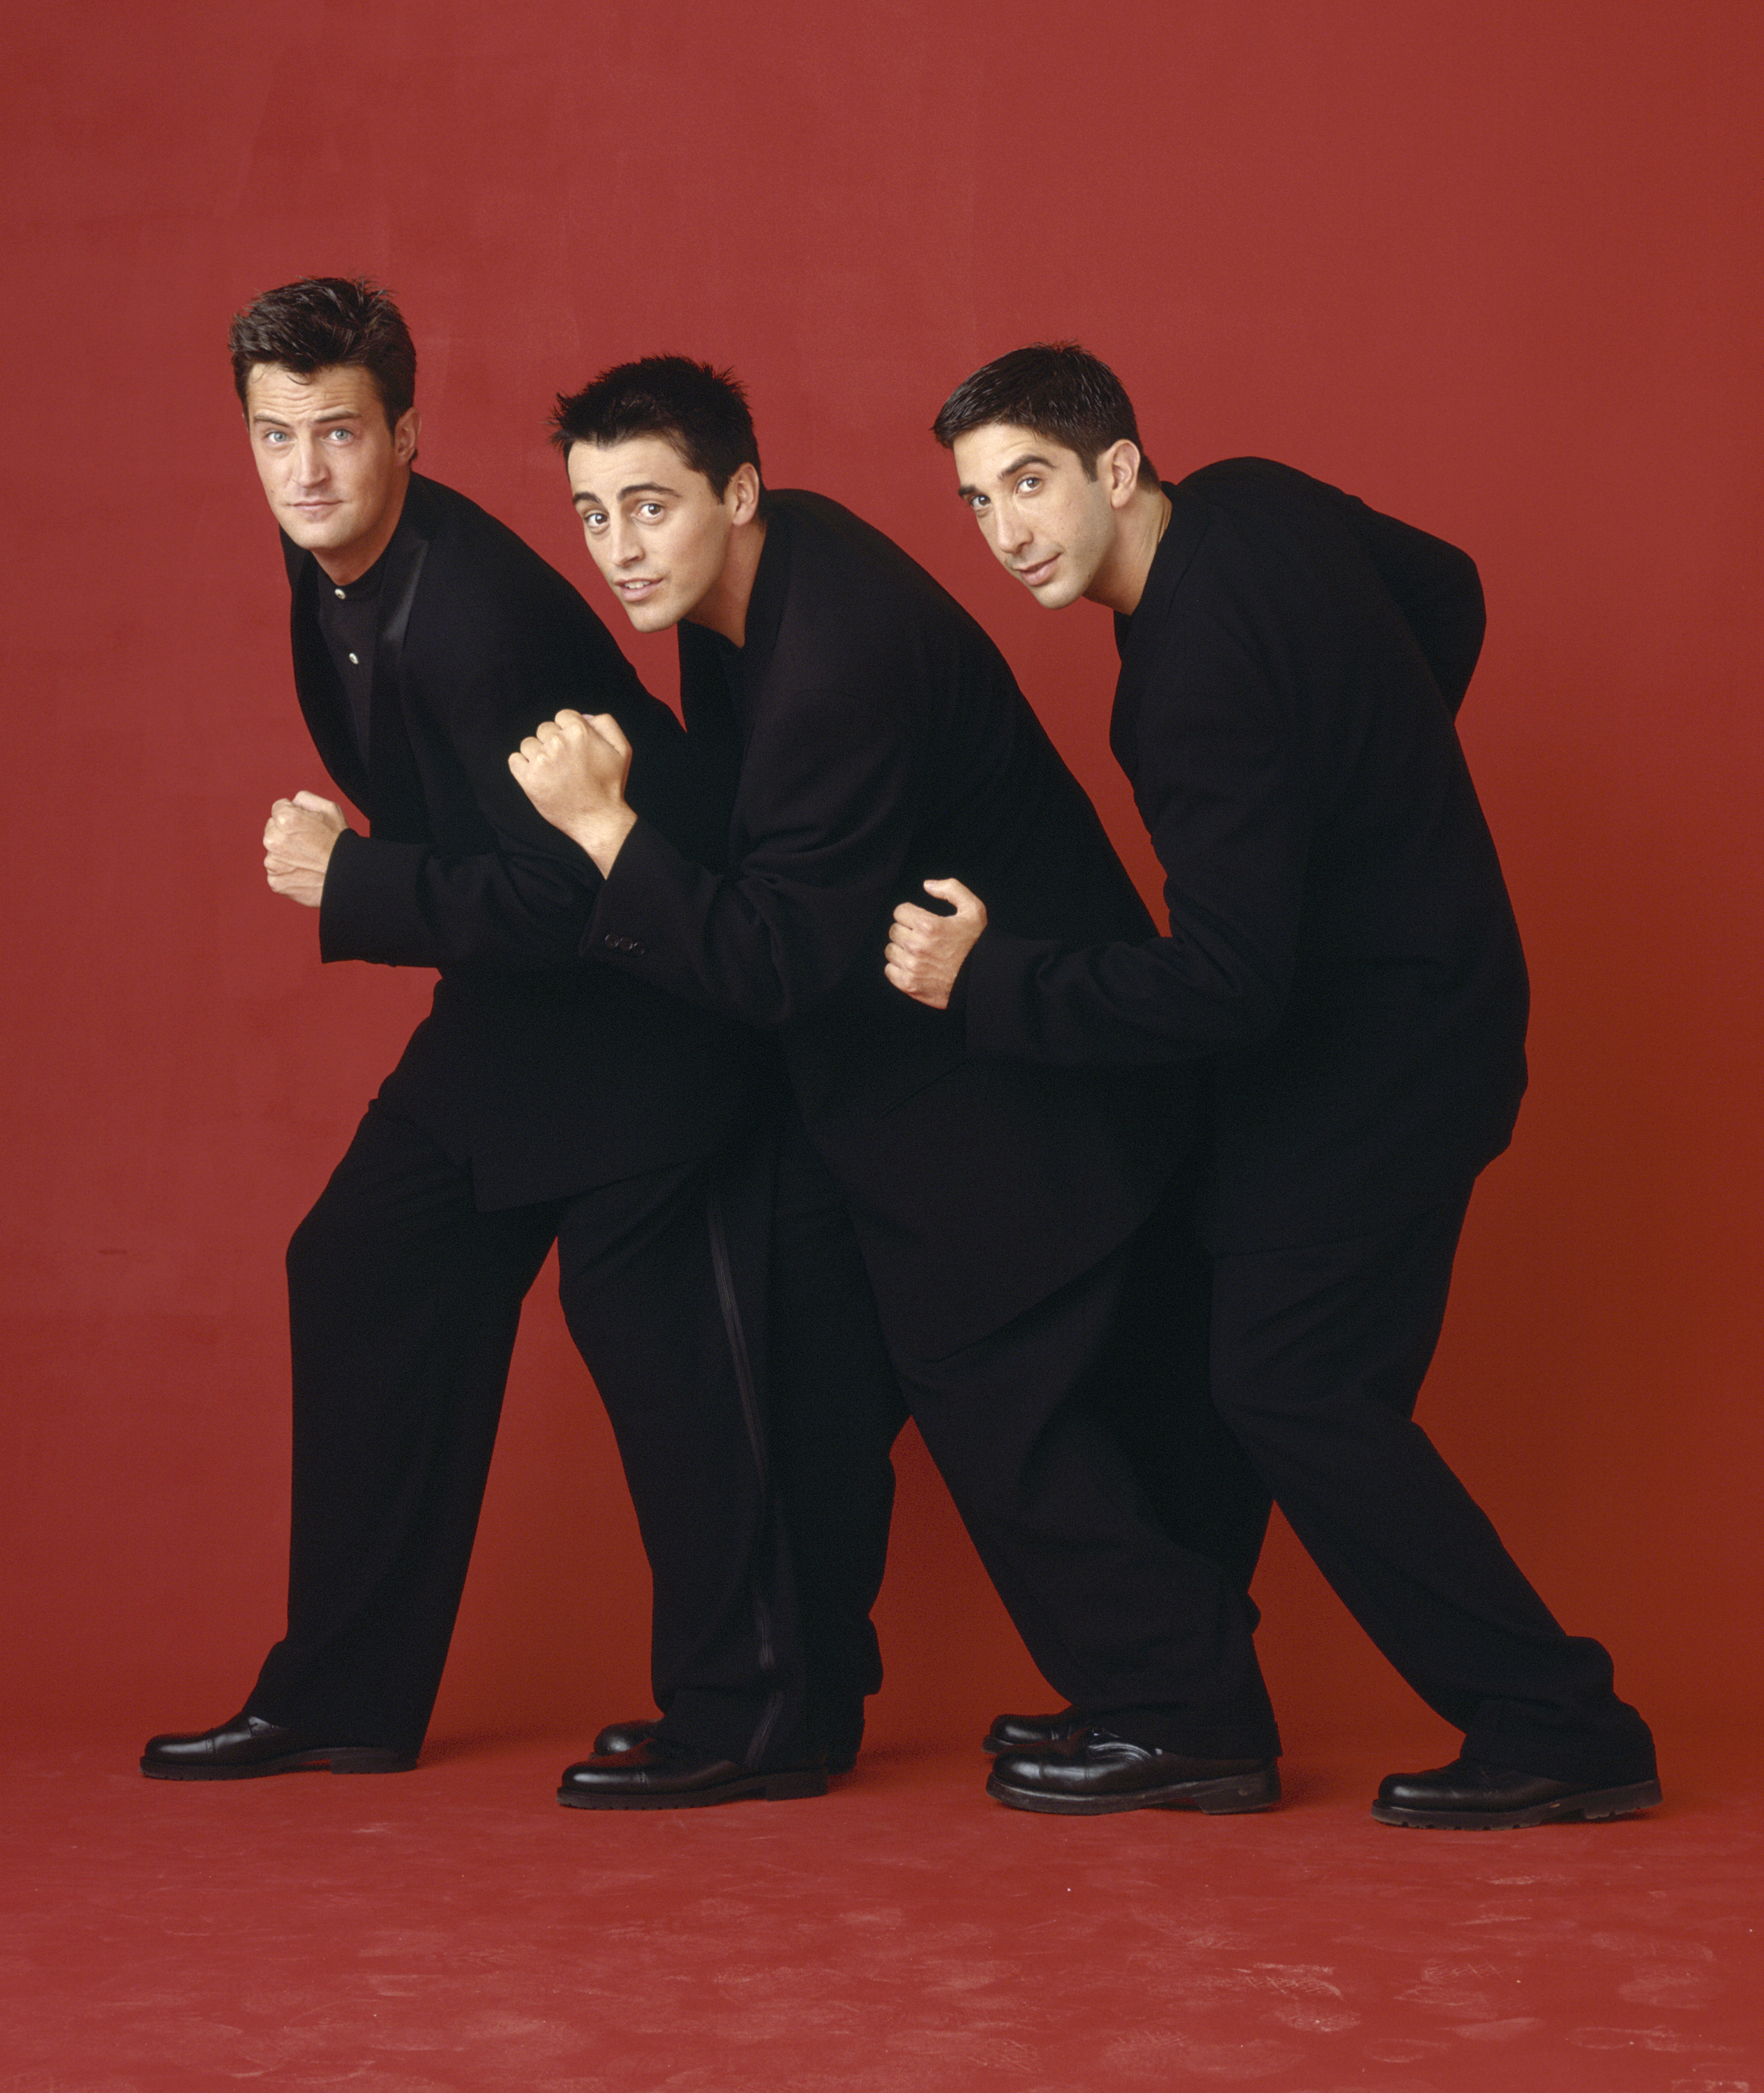 Matthew Perry, Matt LeBlanc, and David Schwimmer posing as their characters from "Friends" in 2009 | Source: Getty Images